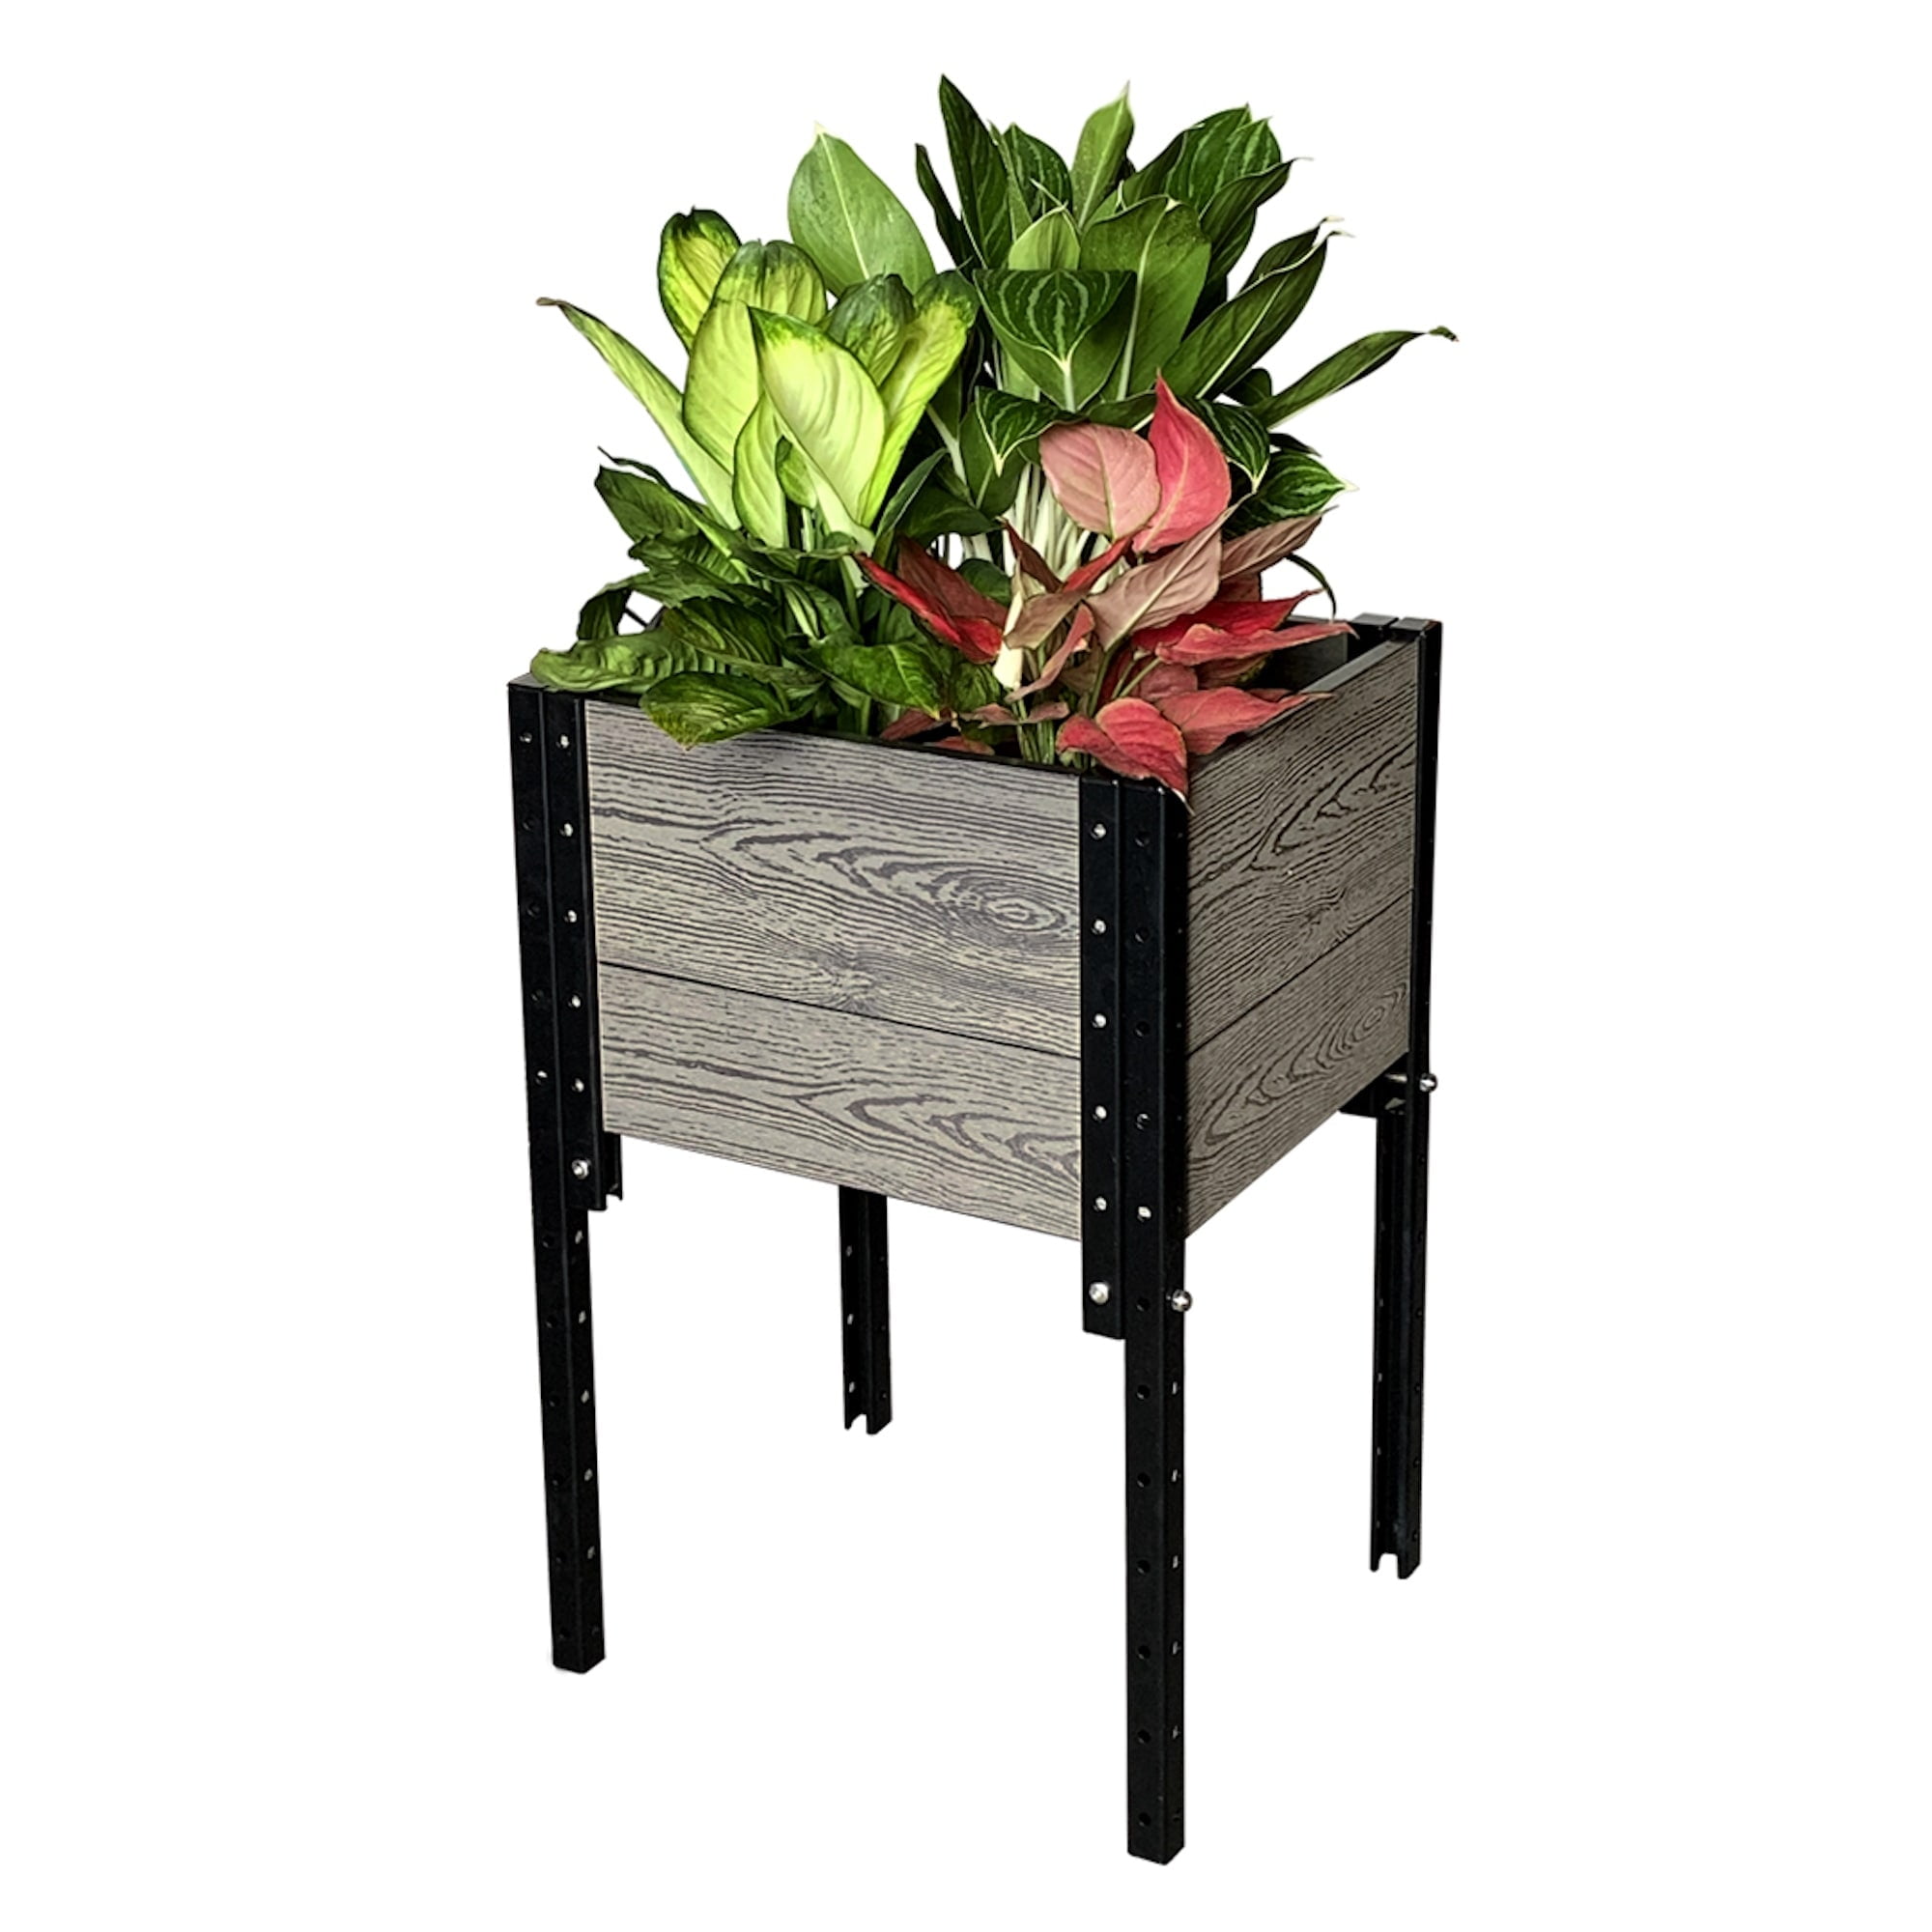 Picture of Everbloom E281719G 17 x 19 x 28 in. Elevated Planter Box in Grey